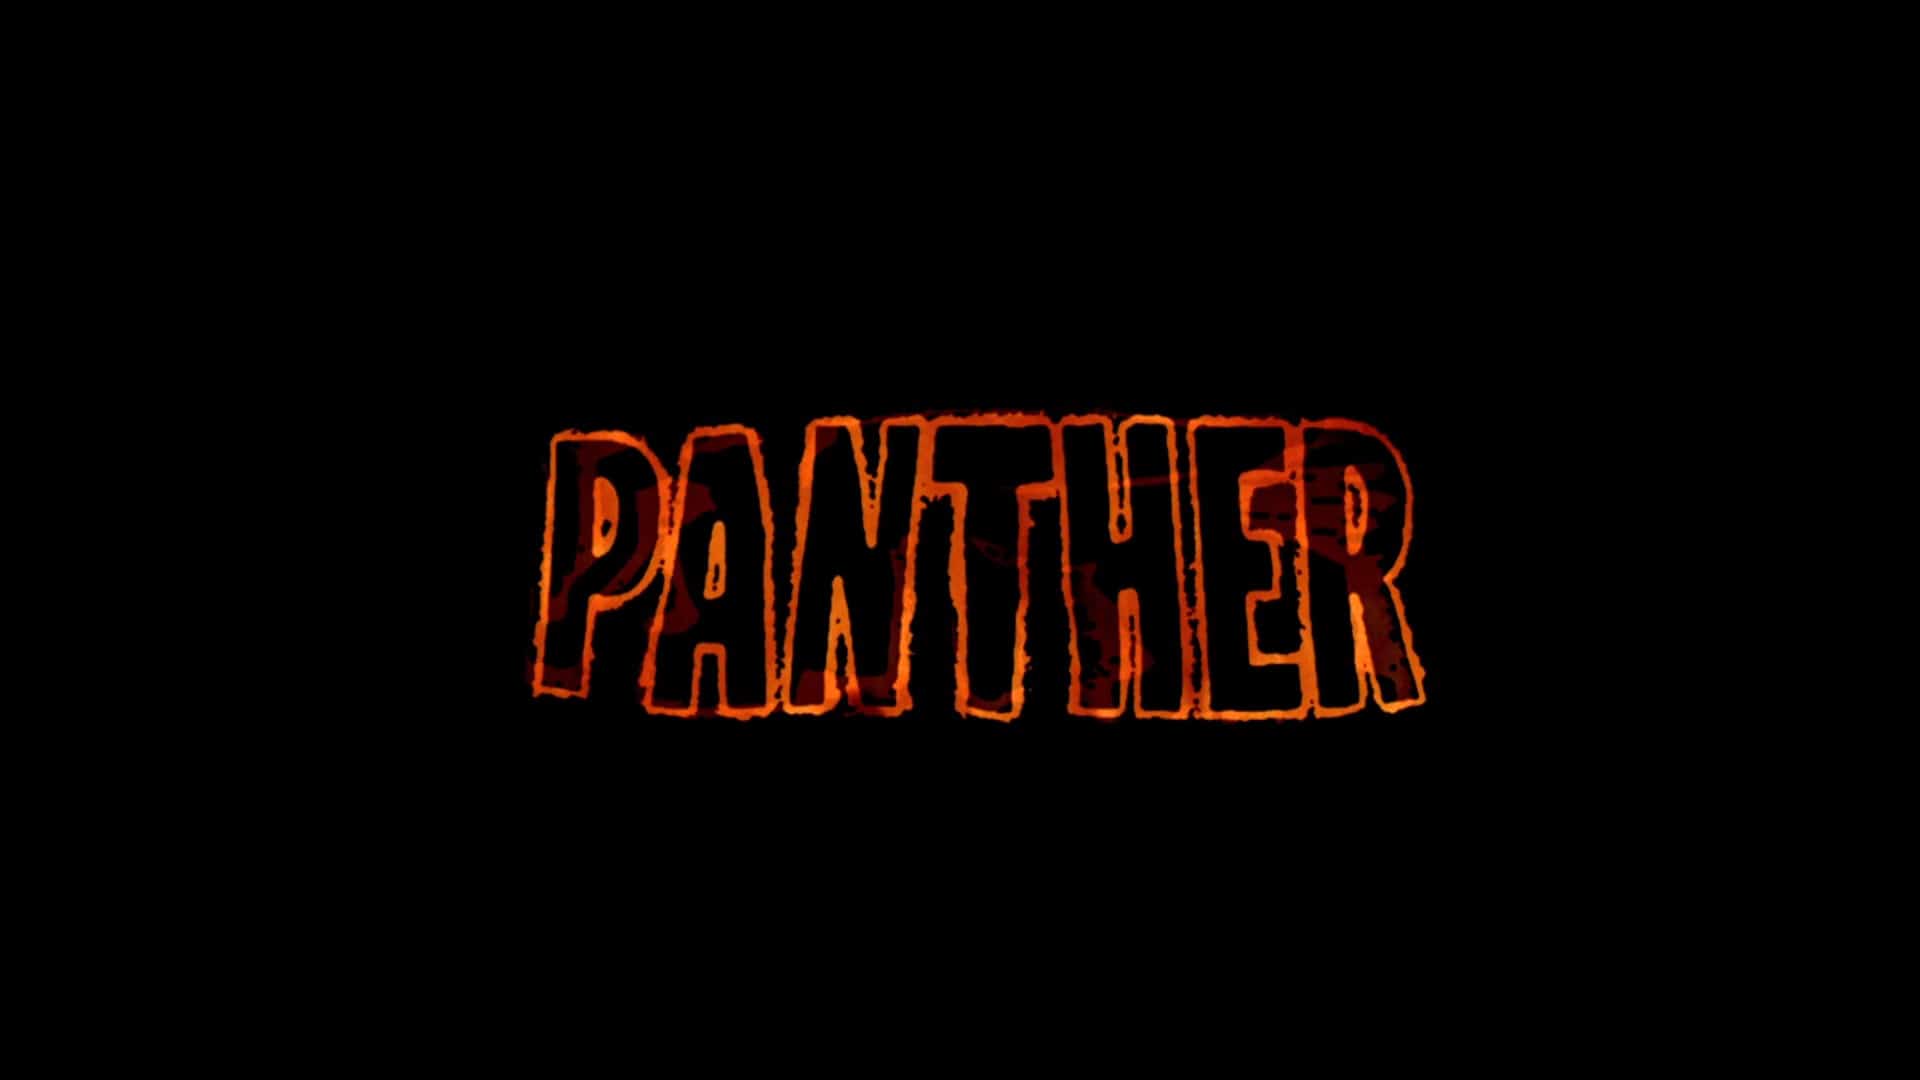 Panther title